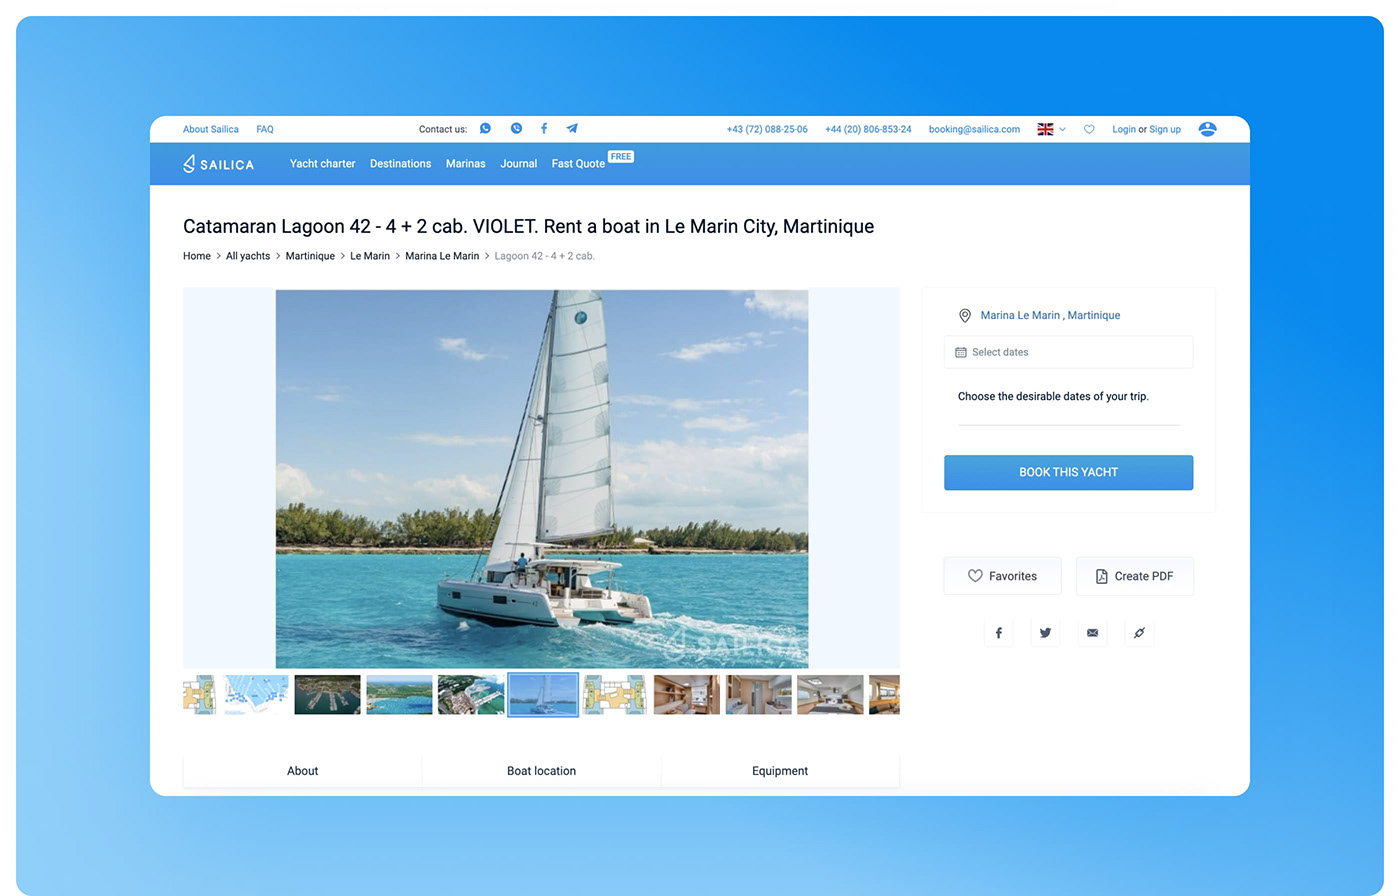 Booking rental Travel yacht booking booking website user experience user interface design charter Yachting UXUI design